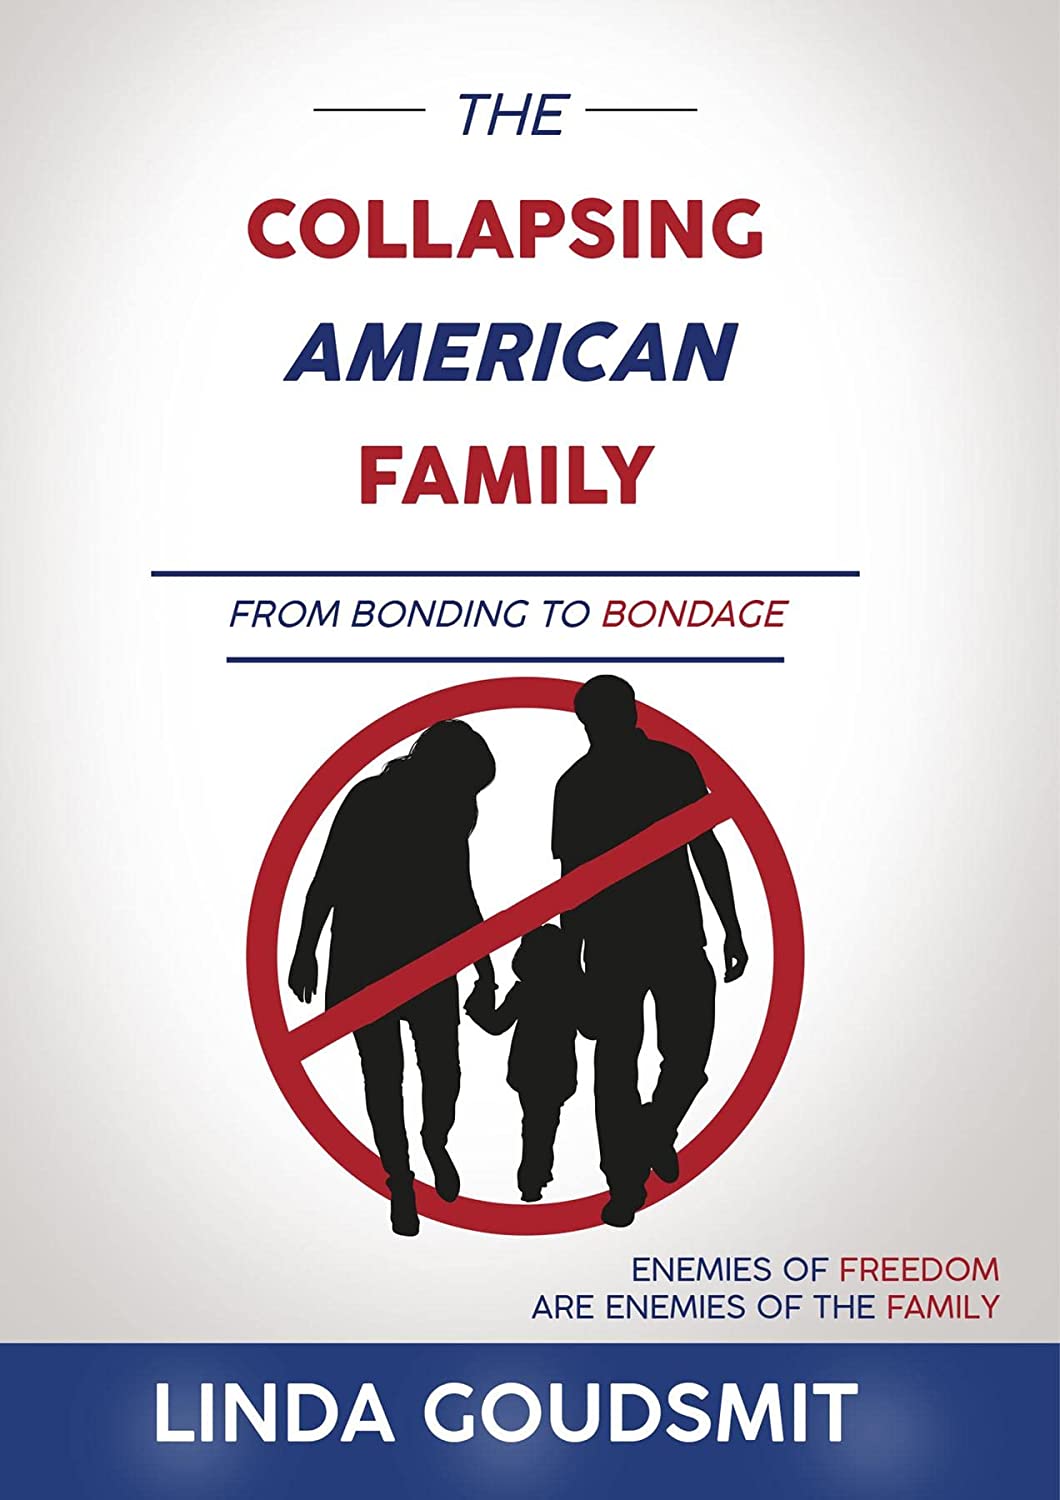 The Collapsing American Family — From Bonding to Bondage – Book Review